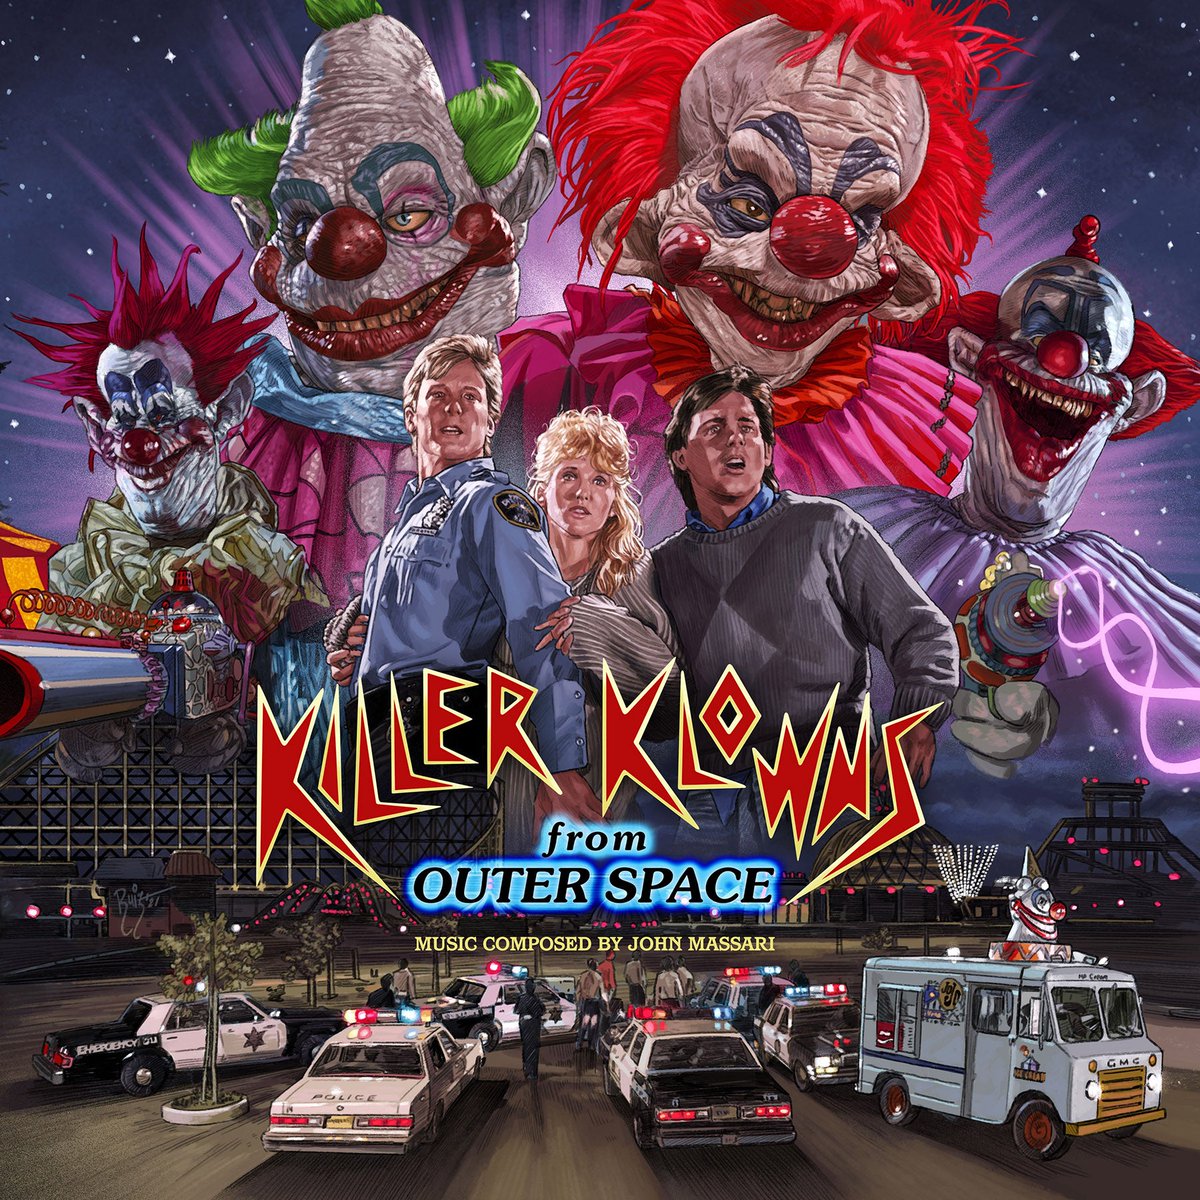 #NowWatching Killer Klowns from Outter Space 🍿 #100HorrorMoviesin92Days #Horror365Challenge